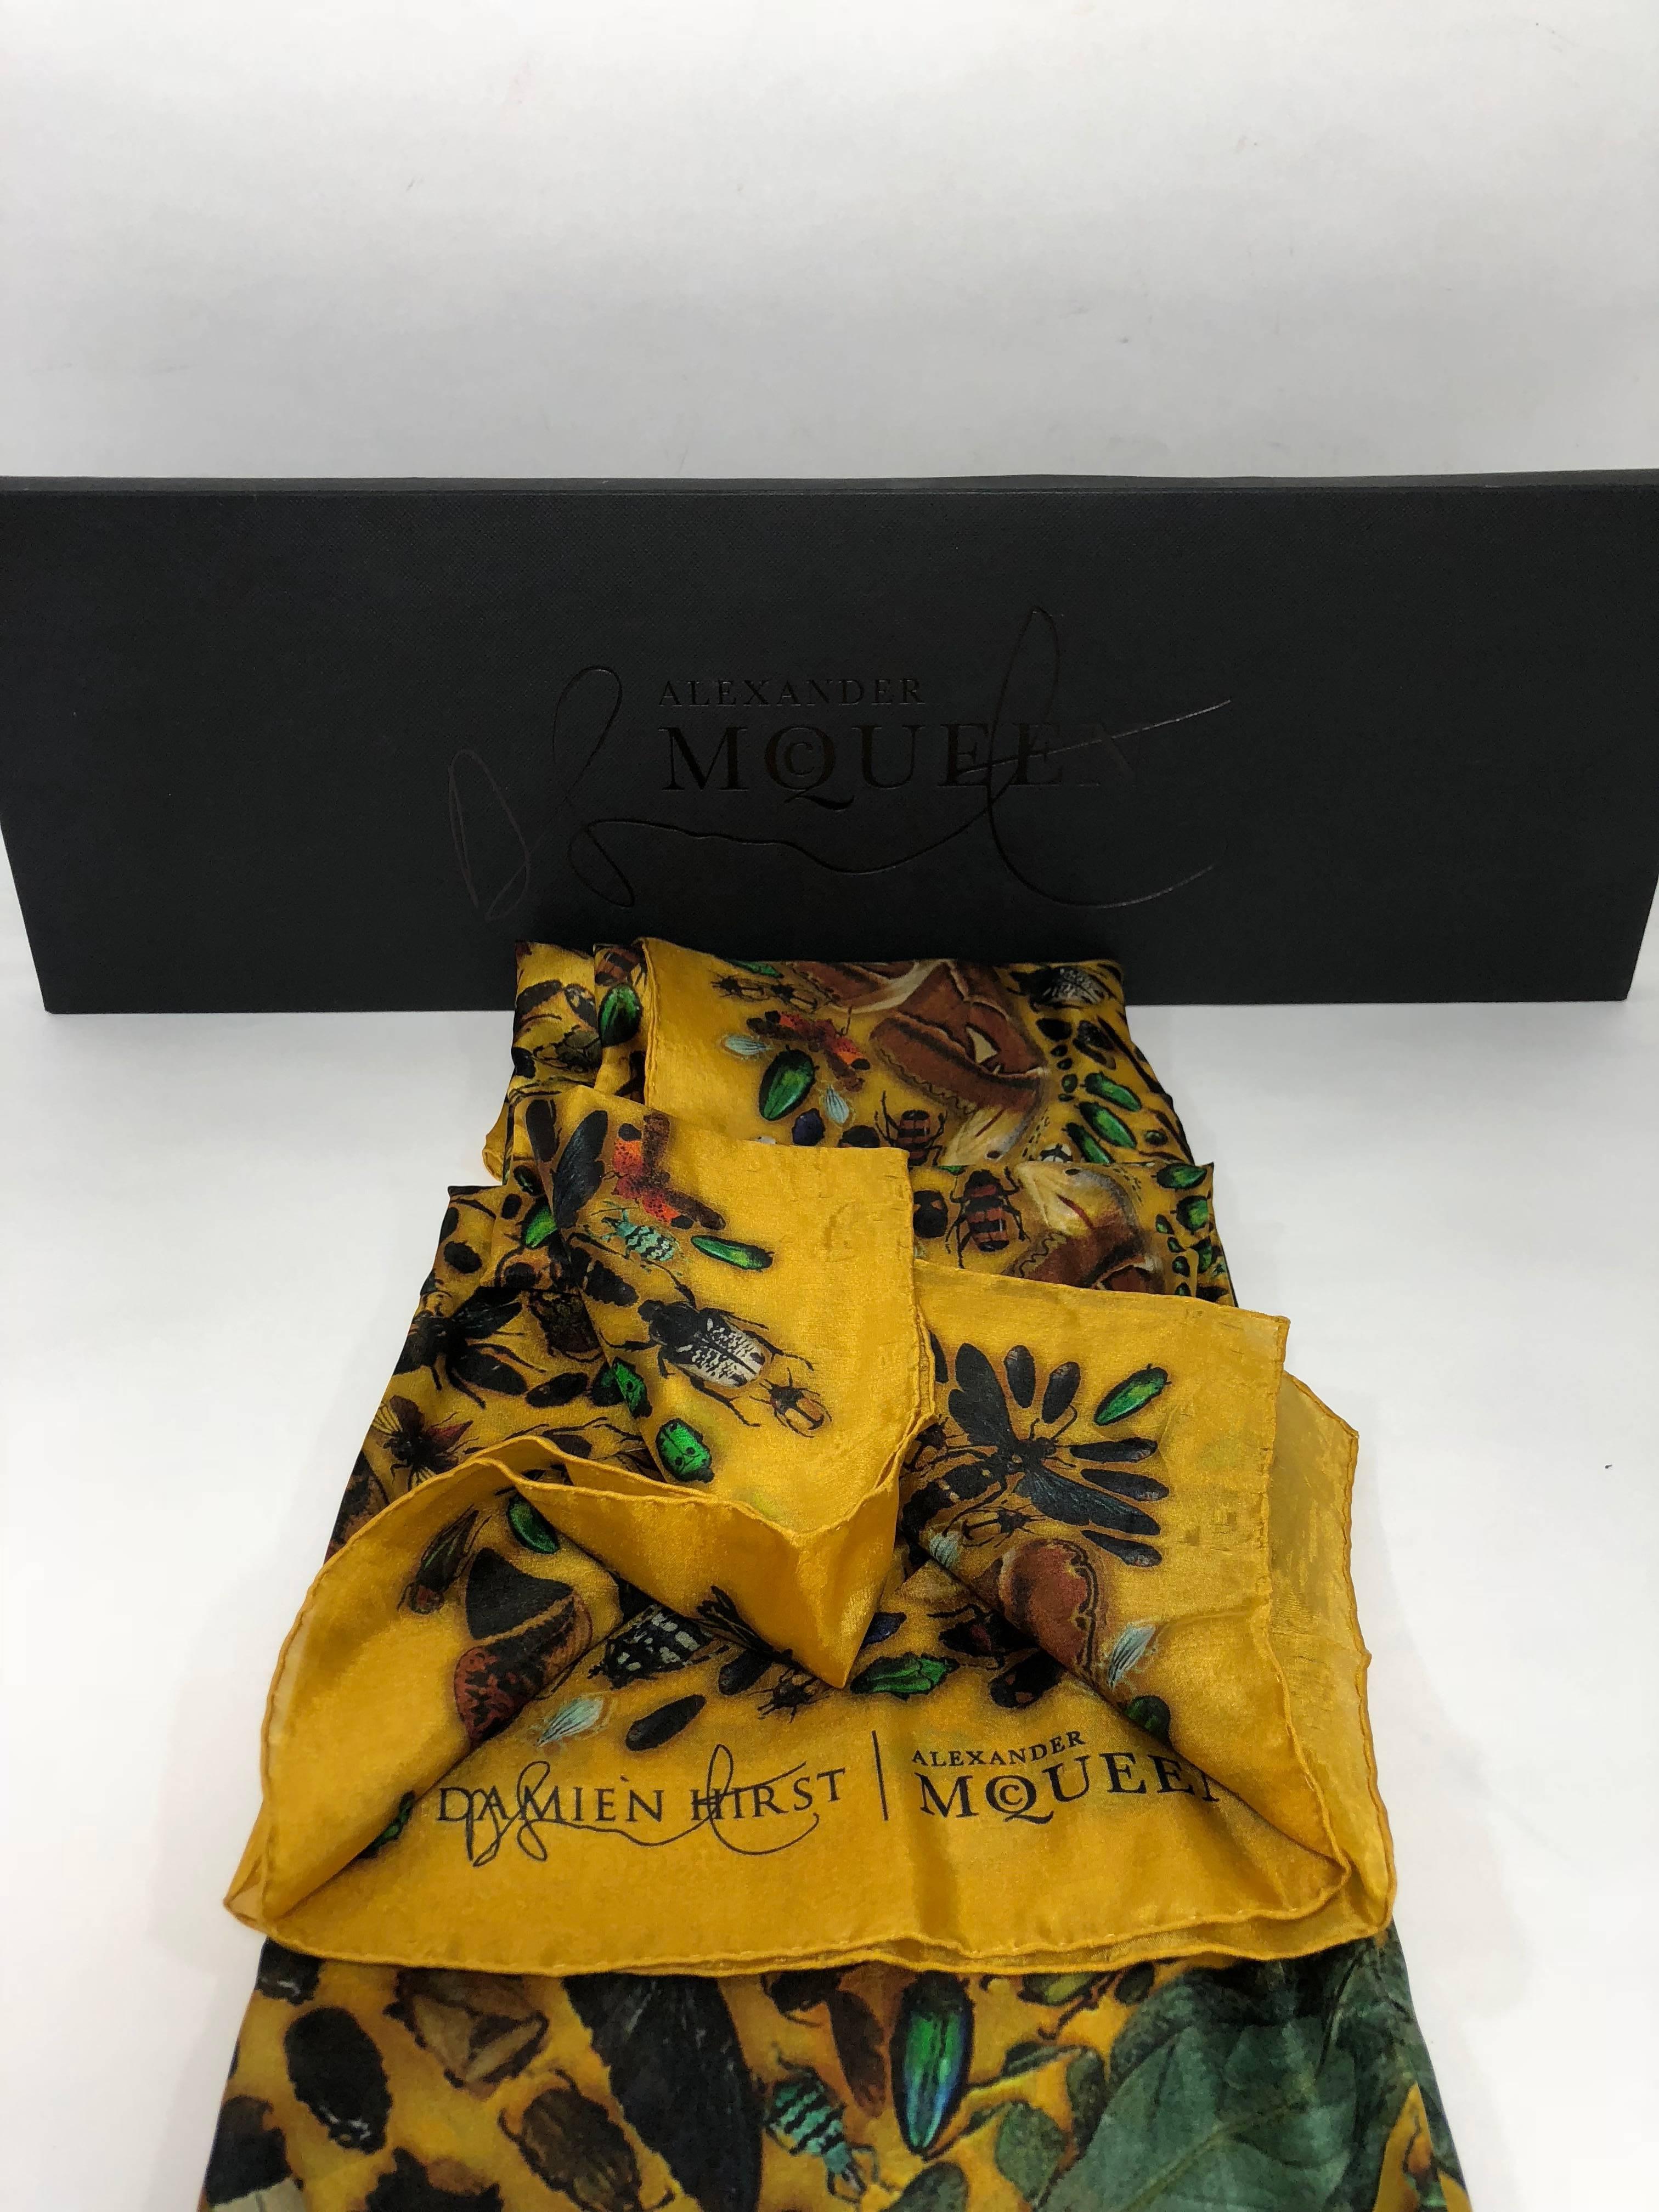 MODEL - Alexander McQueen Silk Damien Hirst Skull Scarf

CONDITION - Never worn!  Limited Edition/Rare

SKU - 1351

MATERIAL - SILK

DIMENSIONS - 55 x 55

COLOR - Yellow, Black, Red/Rust, and Green

COMES WITH - Original Box and Packaging

AVAILABLE